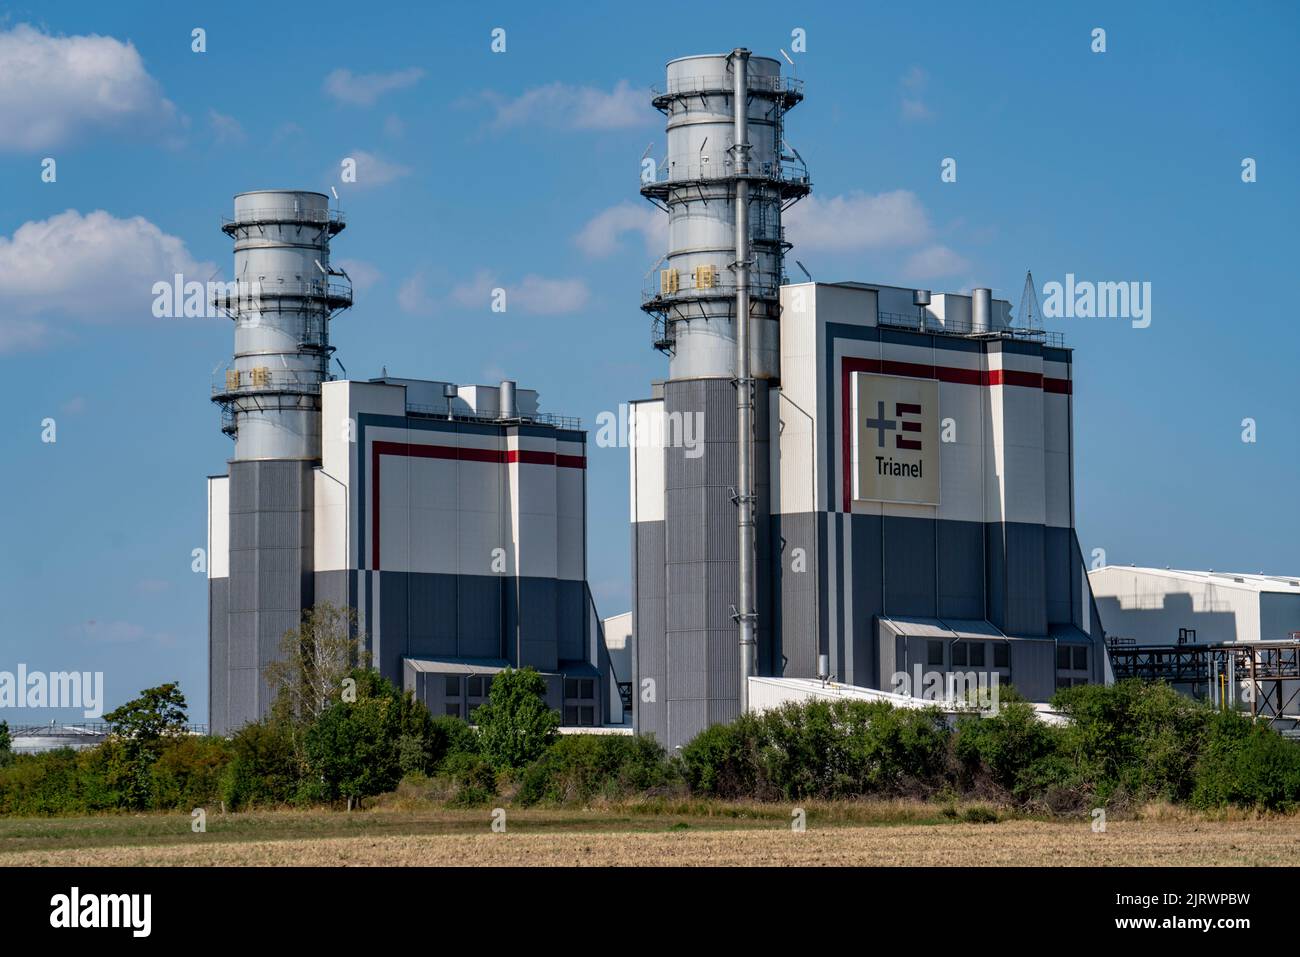 Trianel gas and steam combined cycle power plant Hamm-Uentrop, two power plant units with a capacity of 425 megawatts each, NRW, Germany, Stock Photo